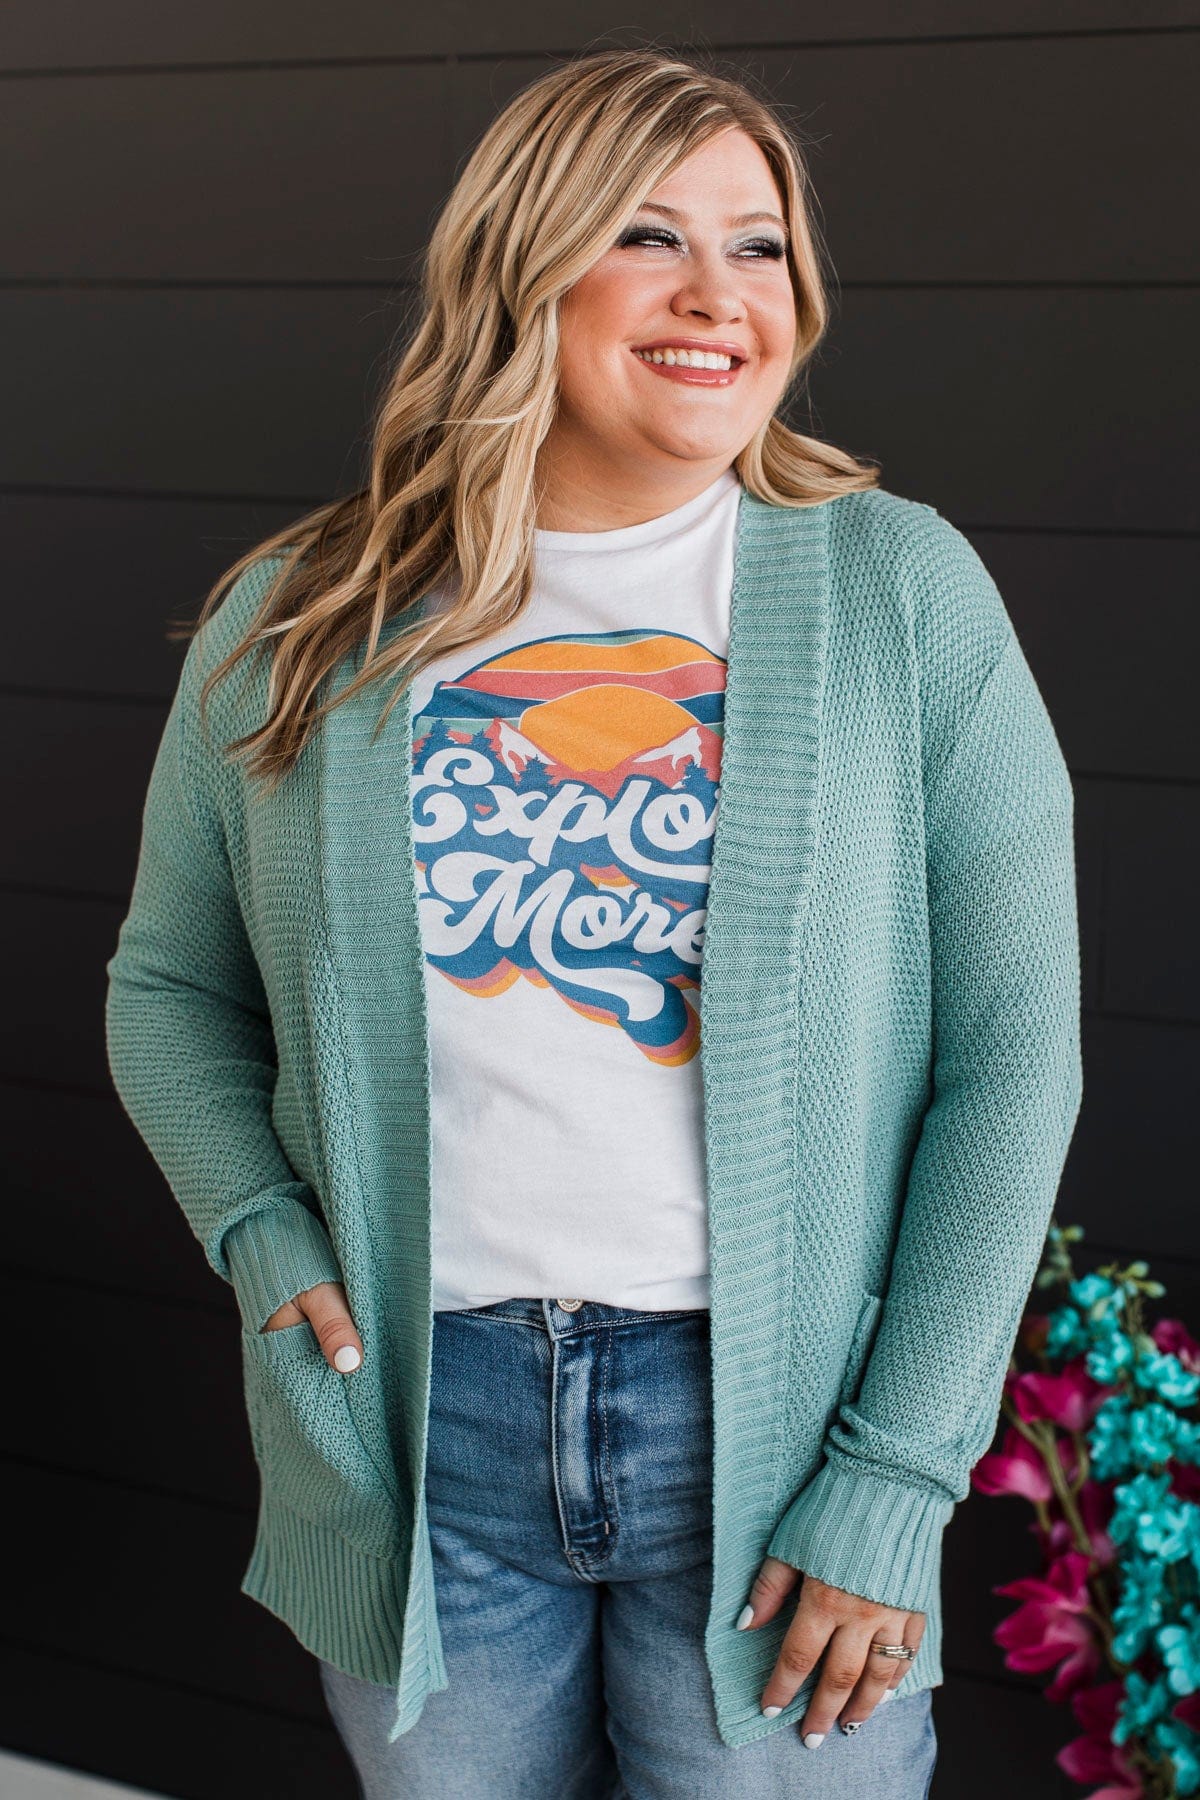 Welcoming To You Knitted Cardigan- Dusty Mint